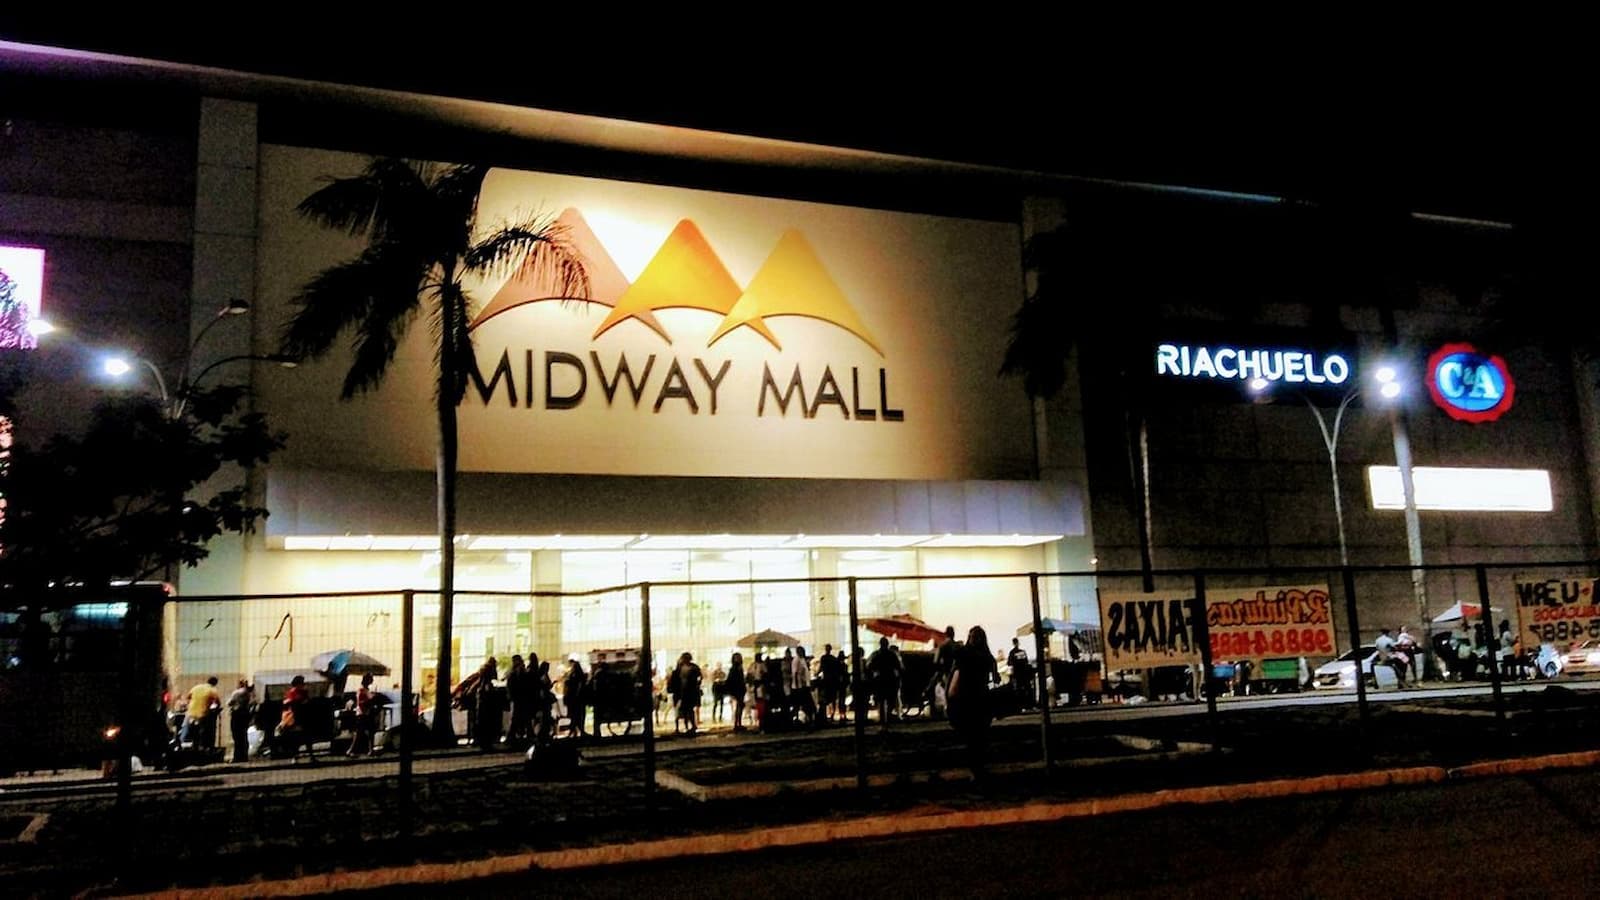 Shopping Midway Mall